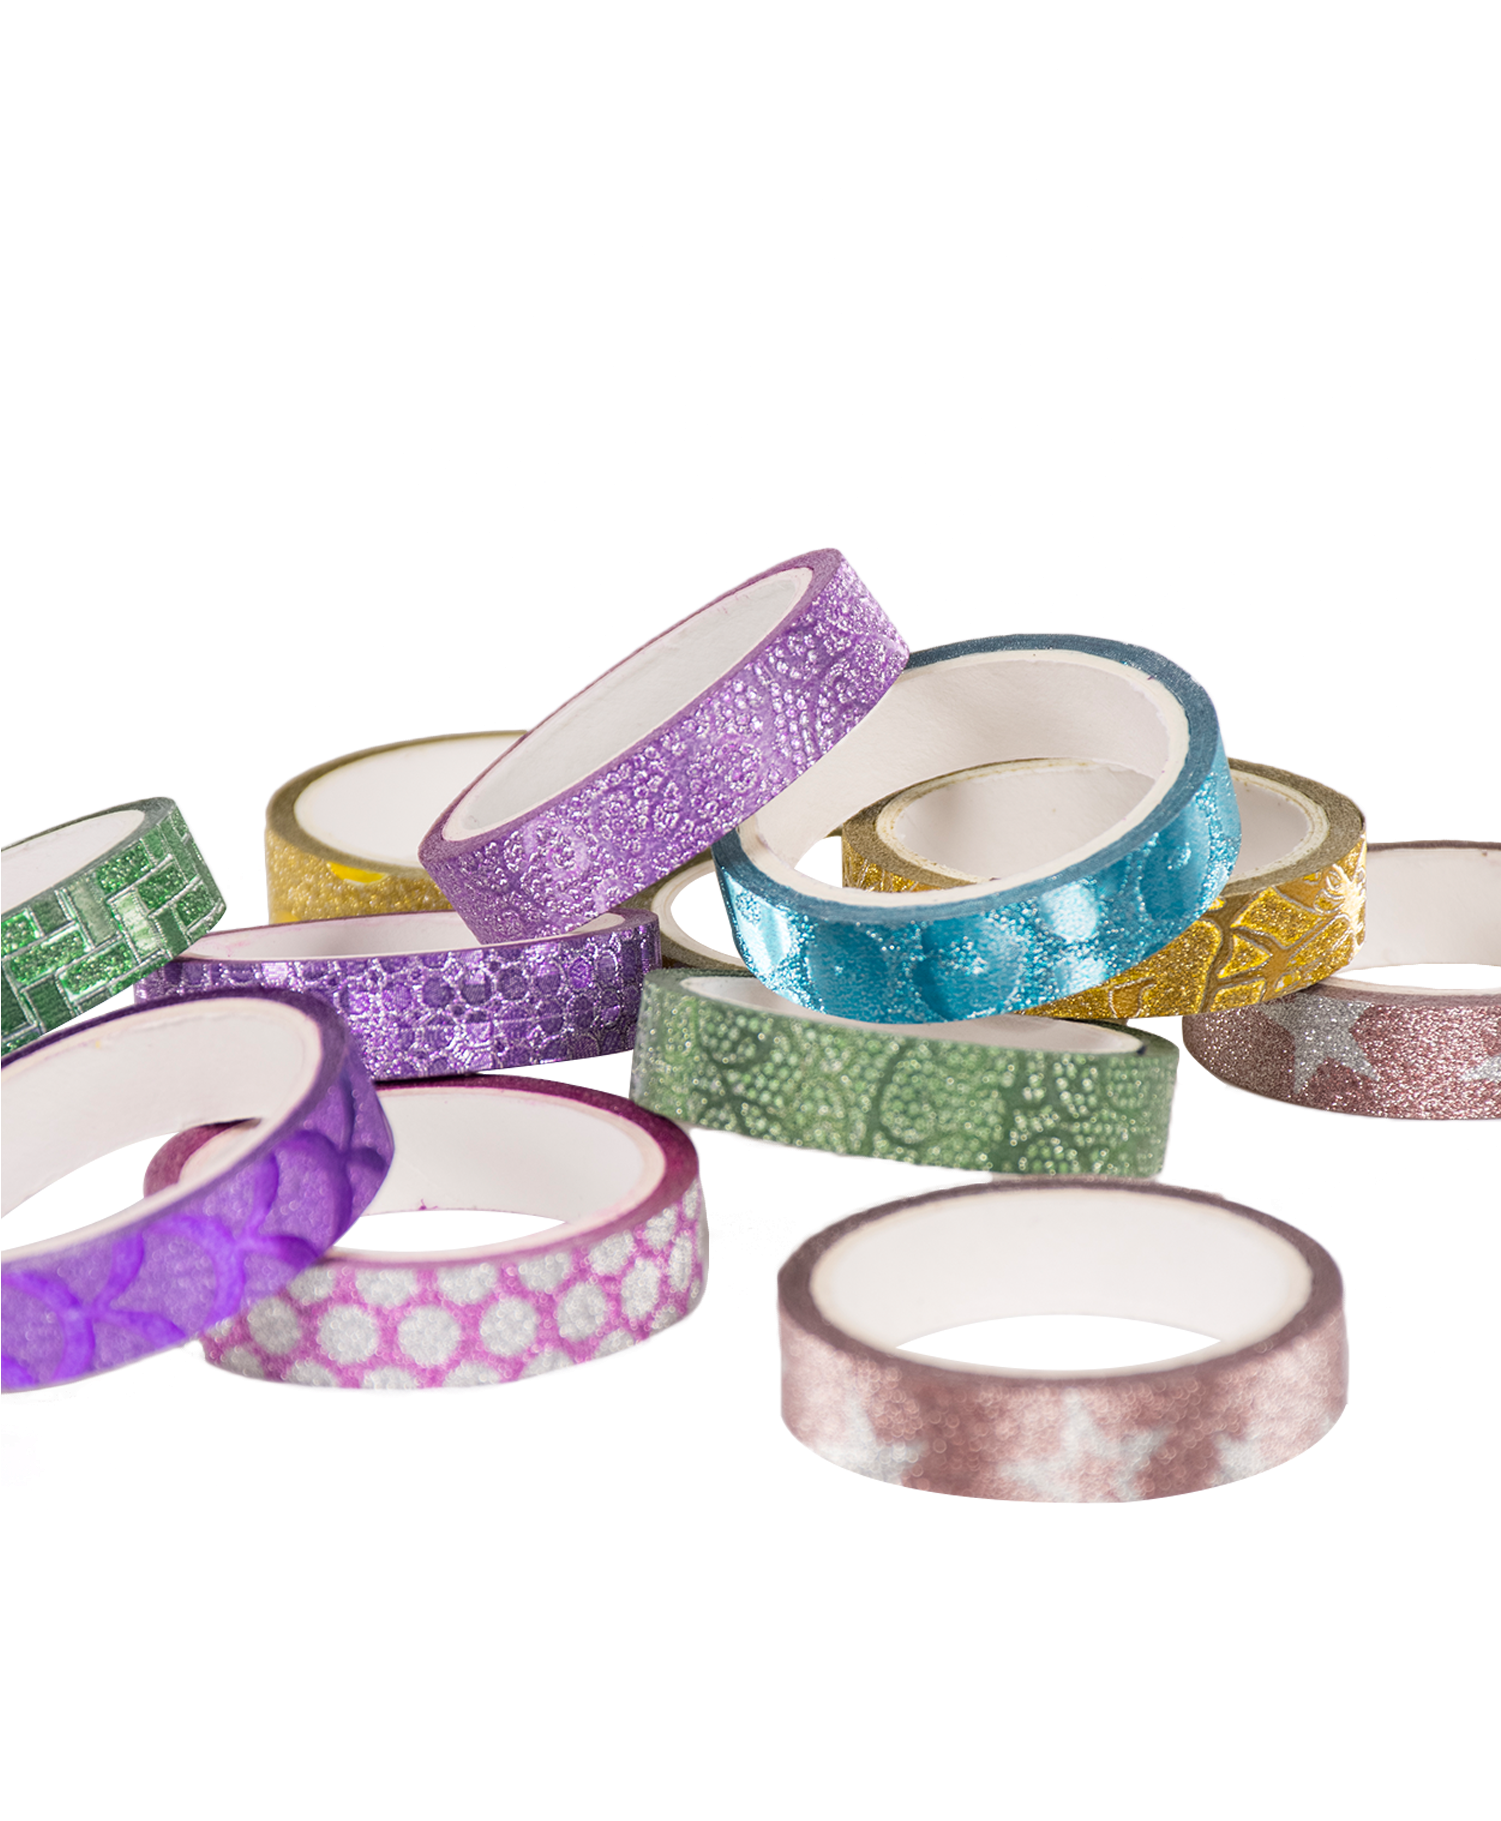 A Group Of Rolls Of Tape